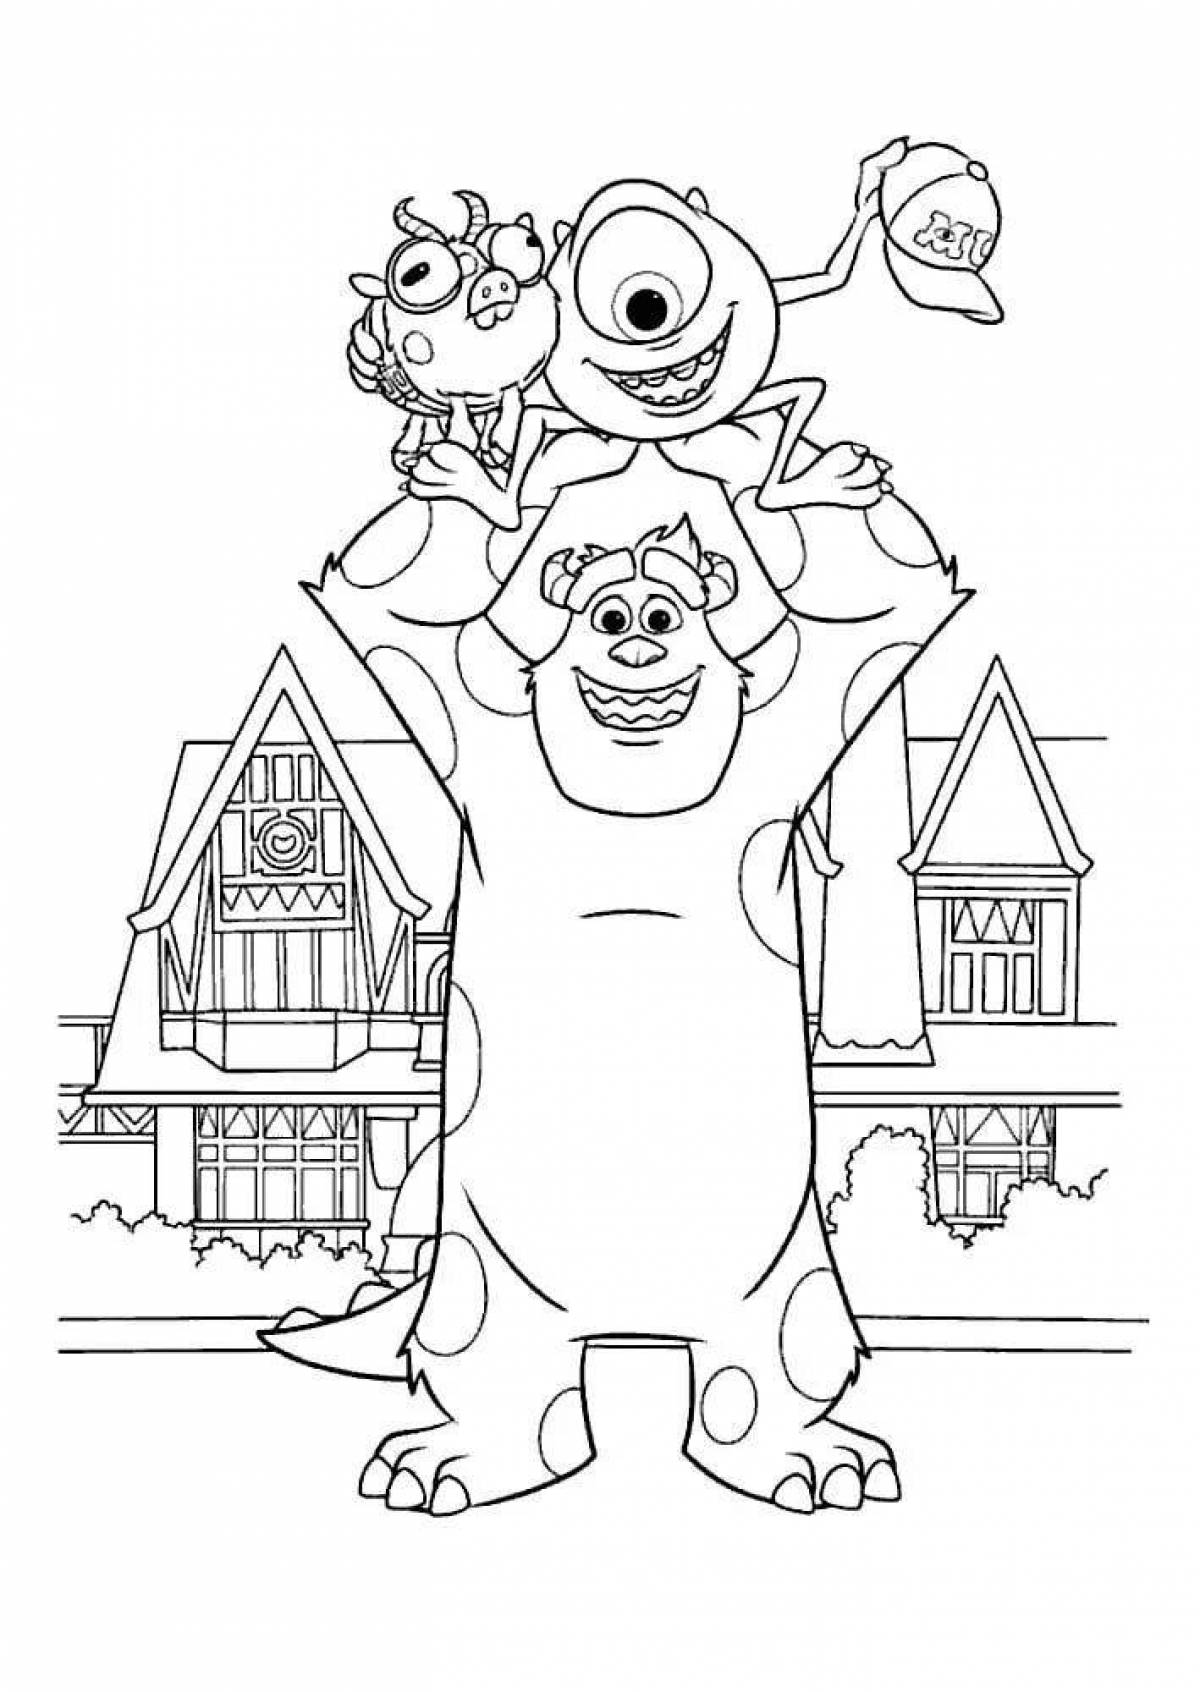 Flashy Monsters University coloring page